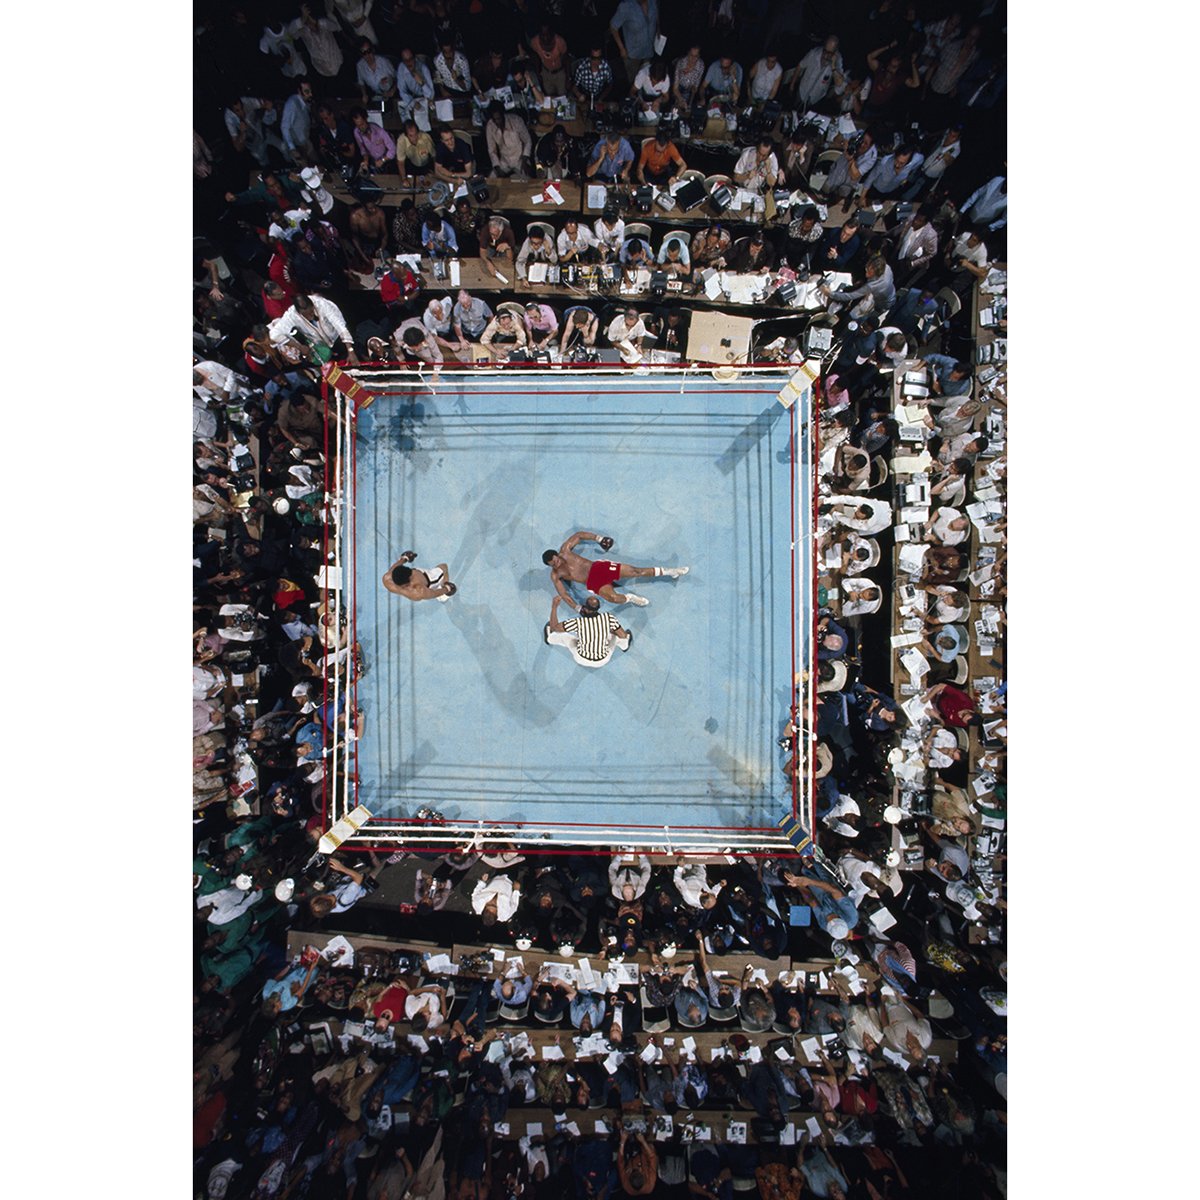 49 years ago today. Aerial view, shot from the rafters of Stade du 20 Mai Stadium in Kinshasa, Zaire, of Muhammad Ali pacing around George Foreman after an 8th round KO in the WBC/ WBA World Heavyweight Title, better known as the “Rumble in the Jungle.” #NeilLeifer #MuhammadAli